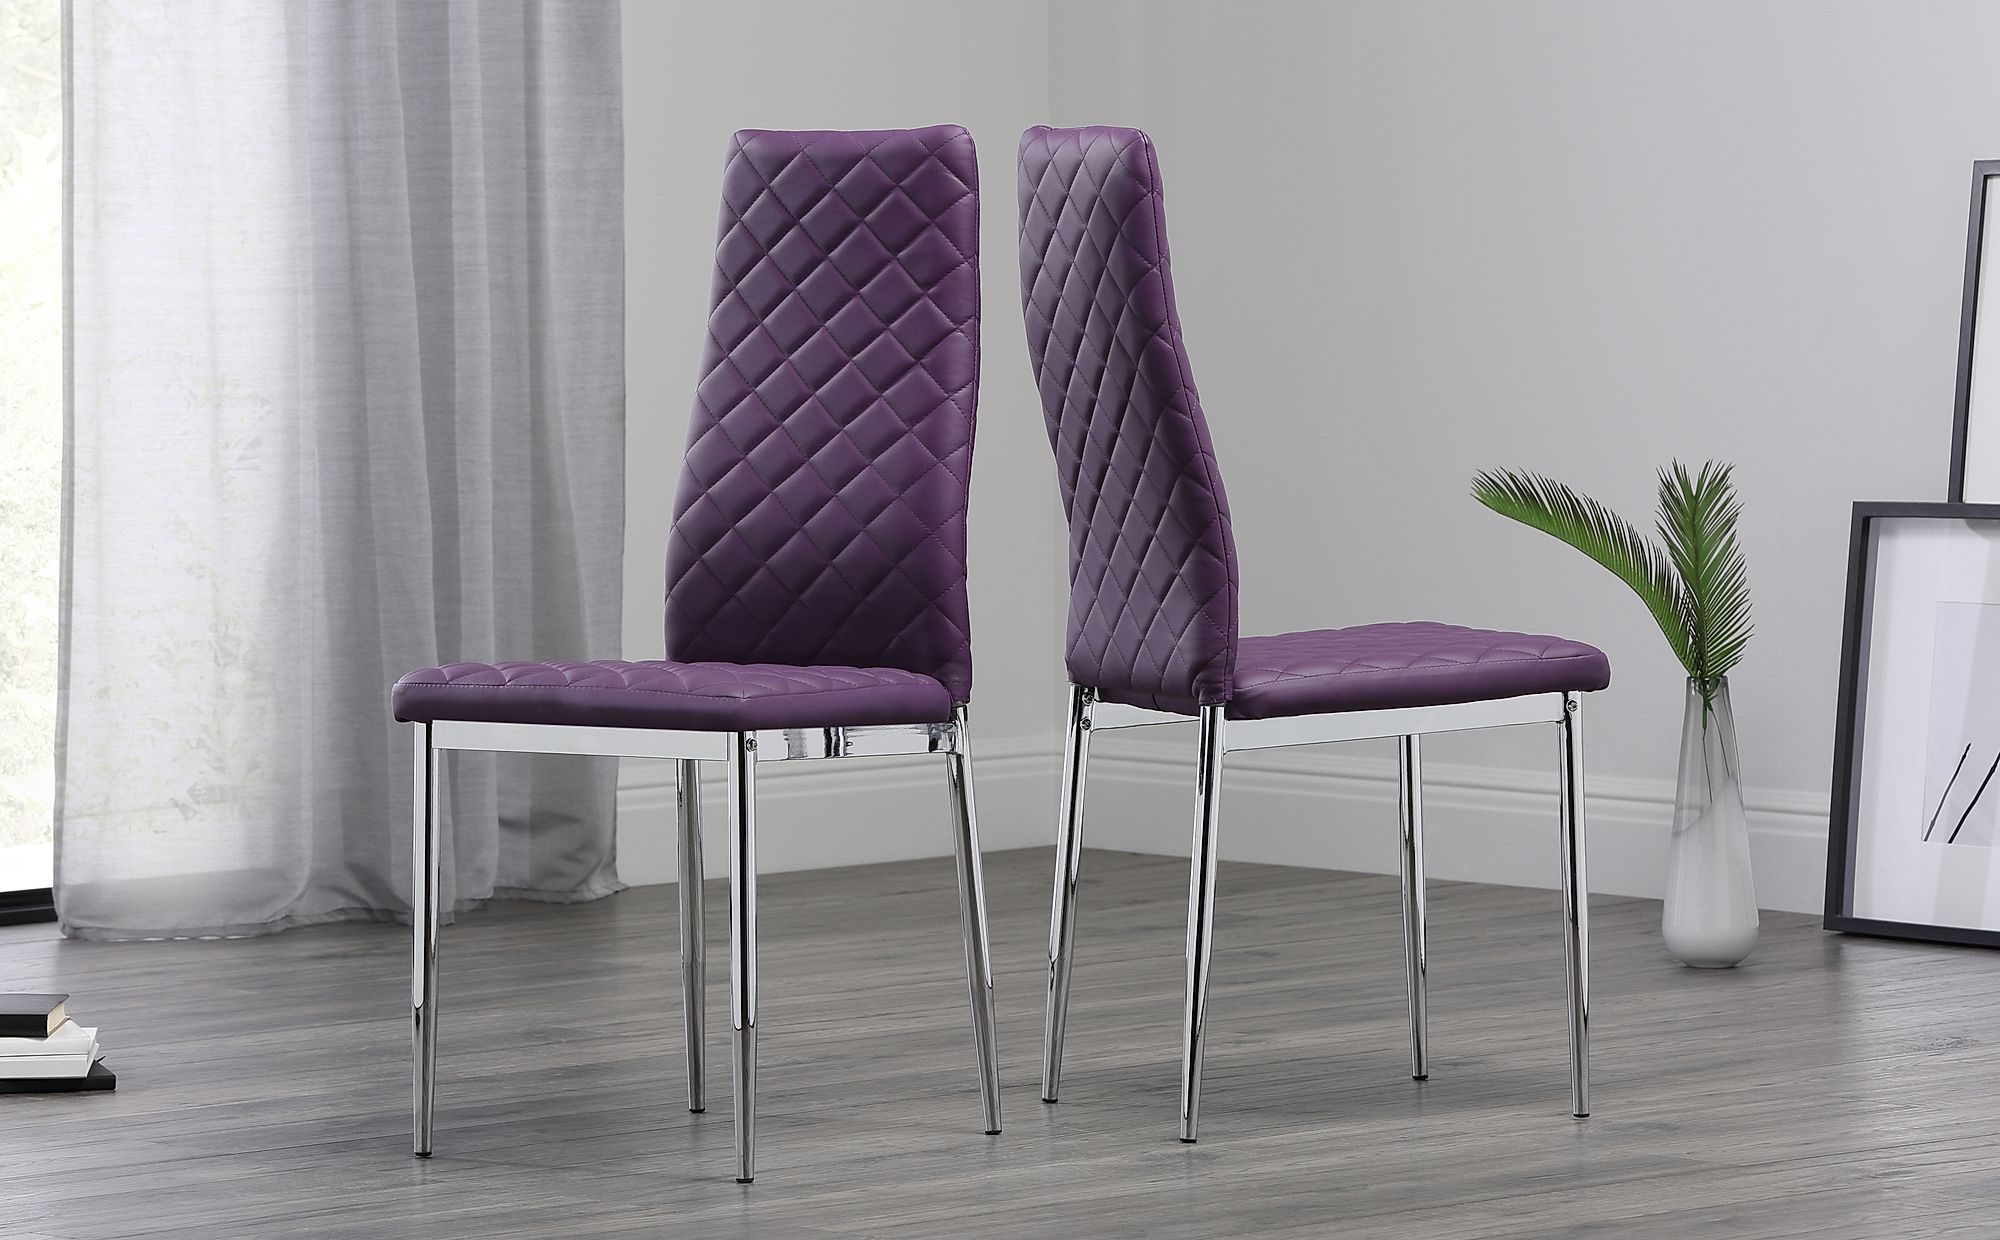 Dining Room Chairs With Chrome Legs